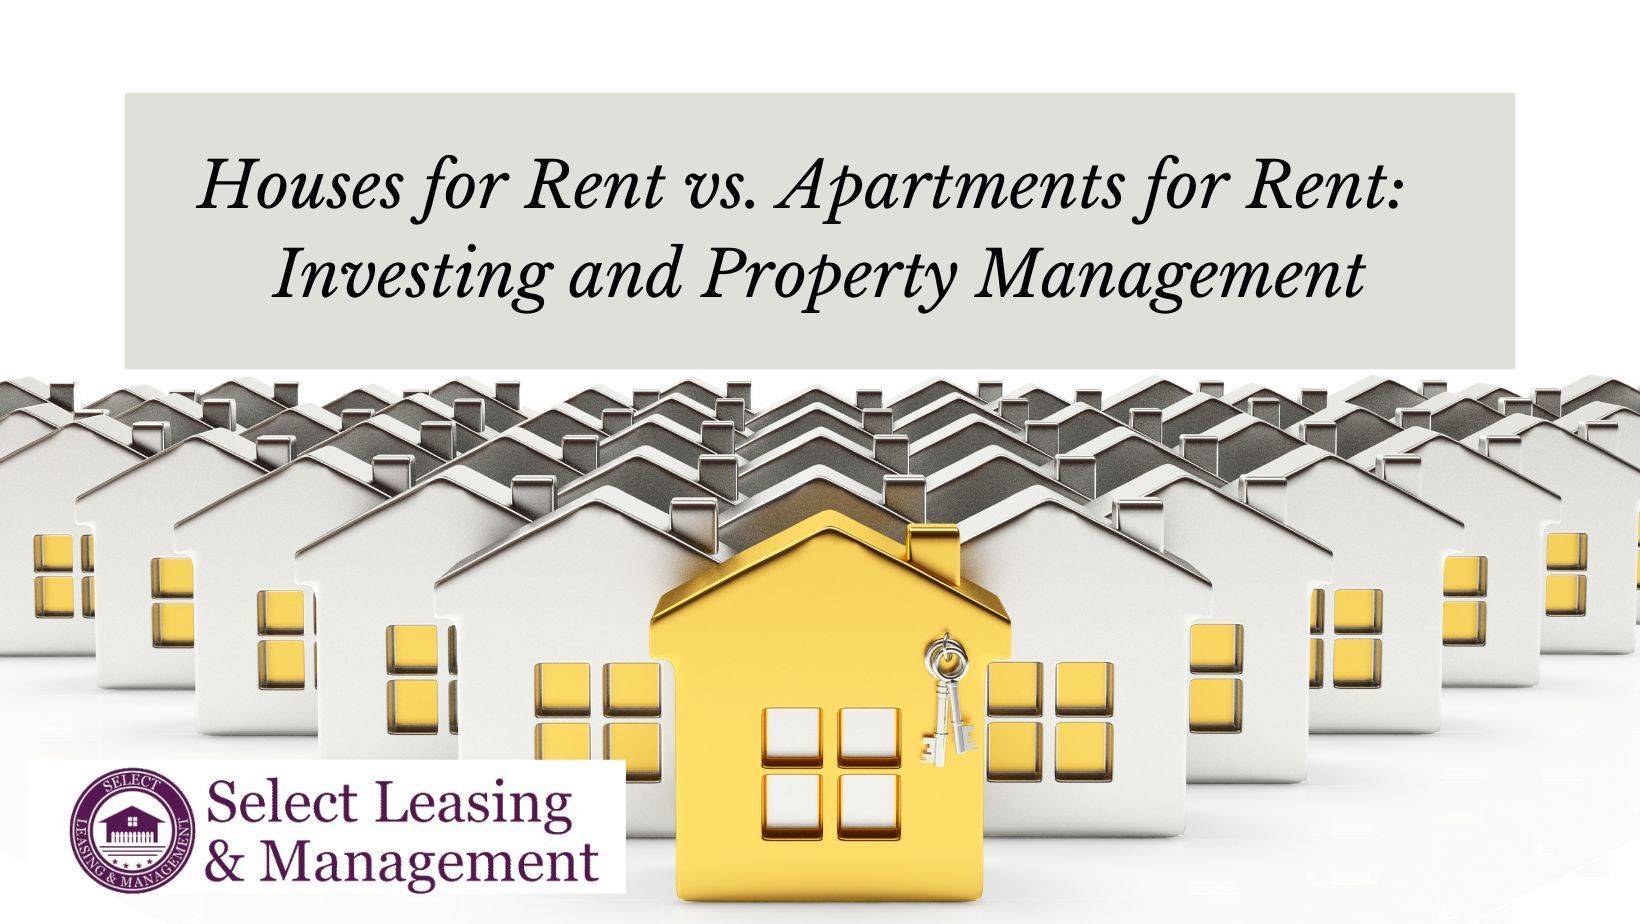 Houses for Rent vs. Apartments for Rent: Investing and Property Management